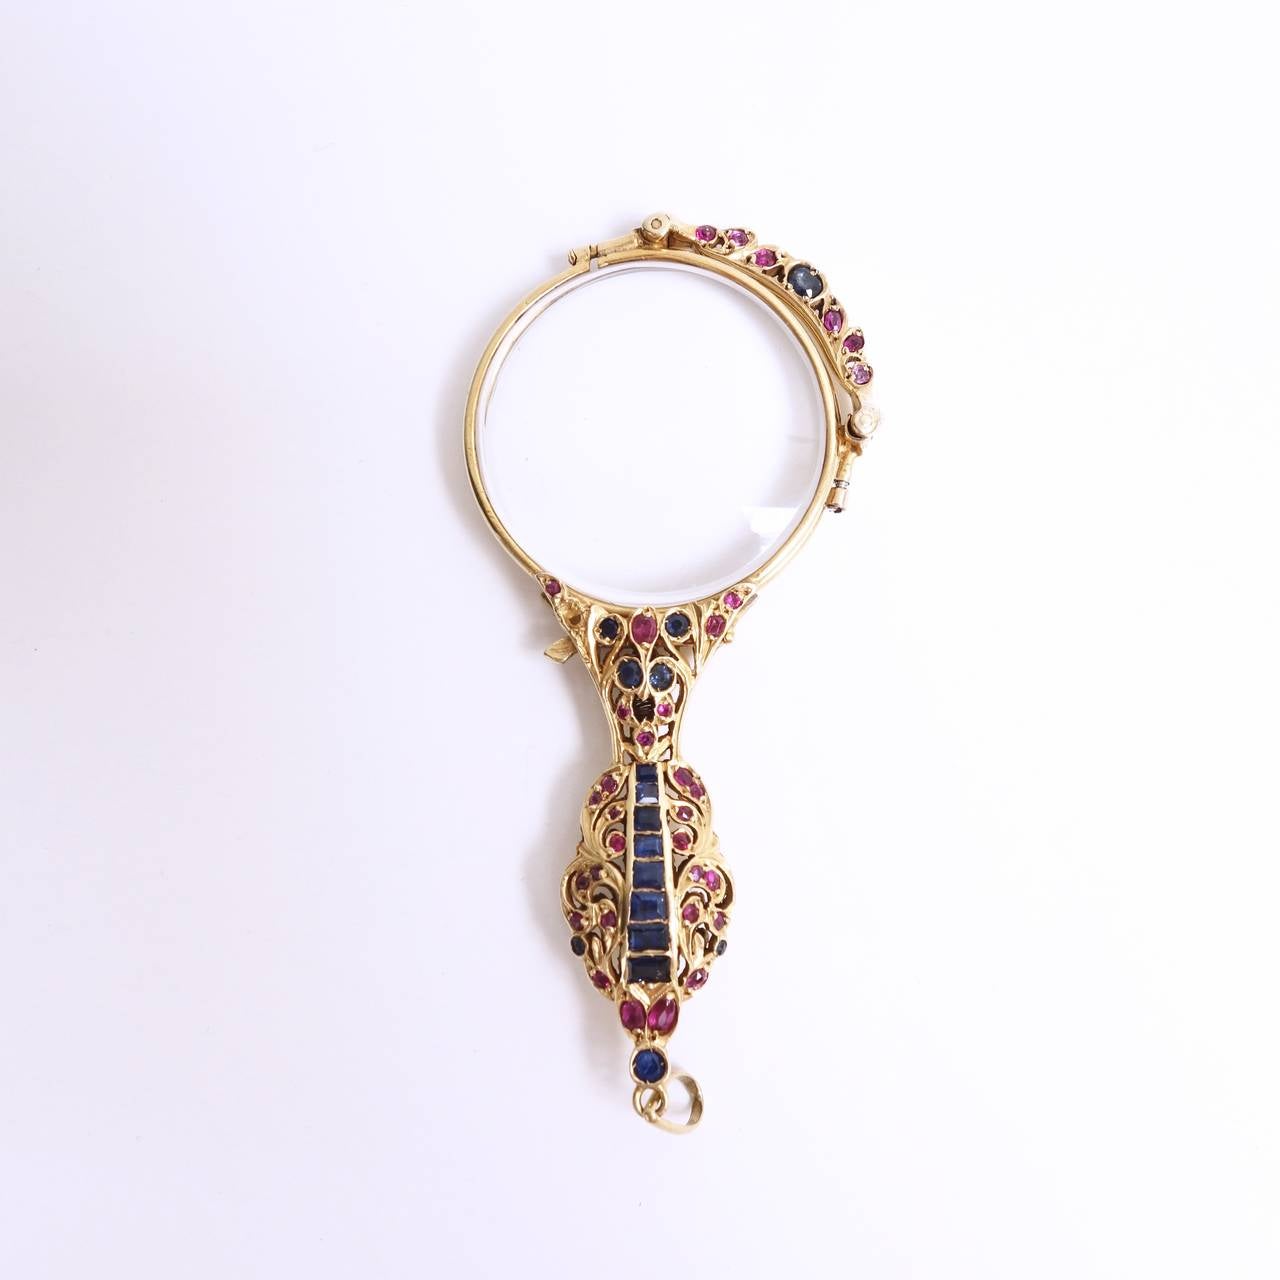 This unique antique lorgnette displays an open-work design handle set with natural blue sapphires and rubies. Crafted in 14K yellow gold with a spring activated opening and closing mechanism. 
There are 16 sapphires an 34 rubies, approximate total